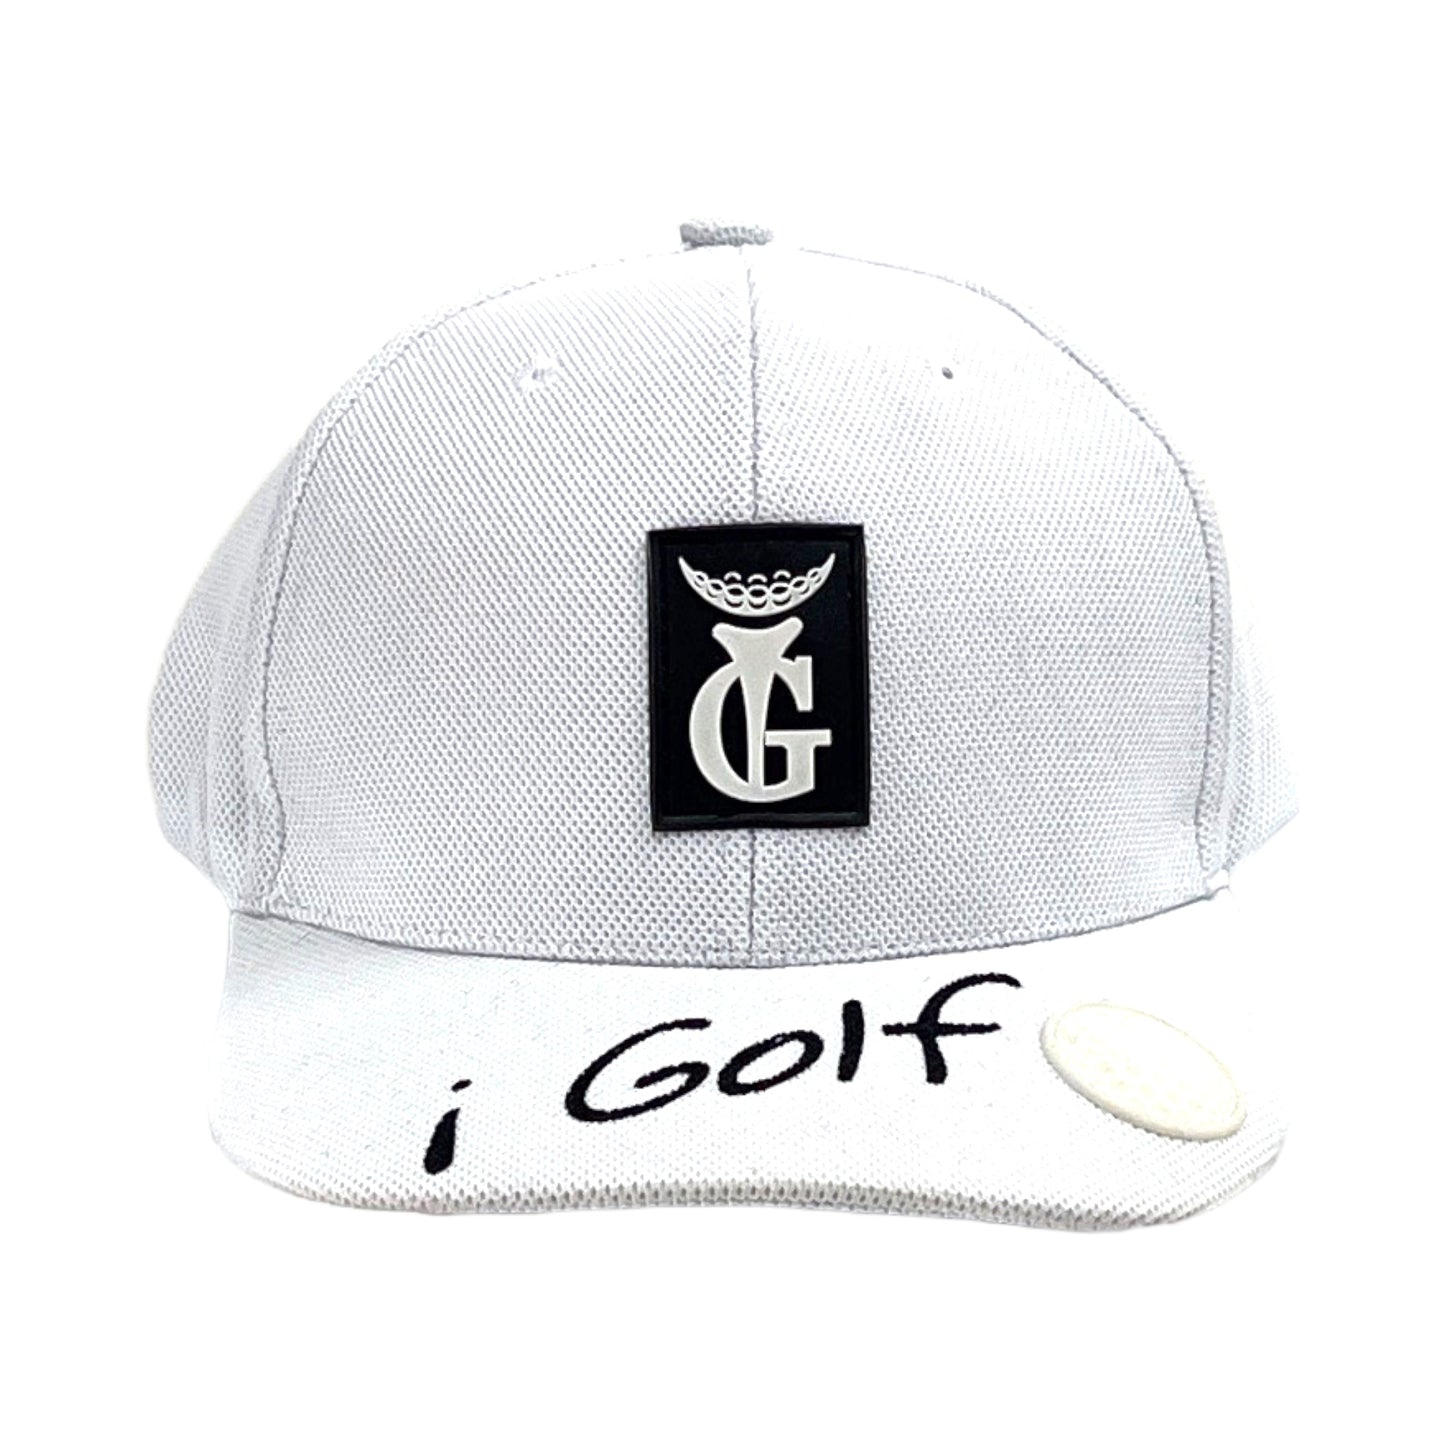 iGolf by Alvin Wiley - Flex Fit iGolf Hat - Multiple Colors - One Size Fits All